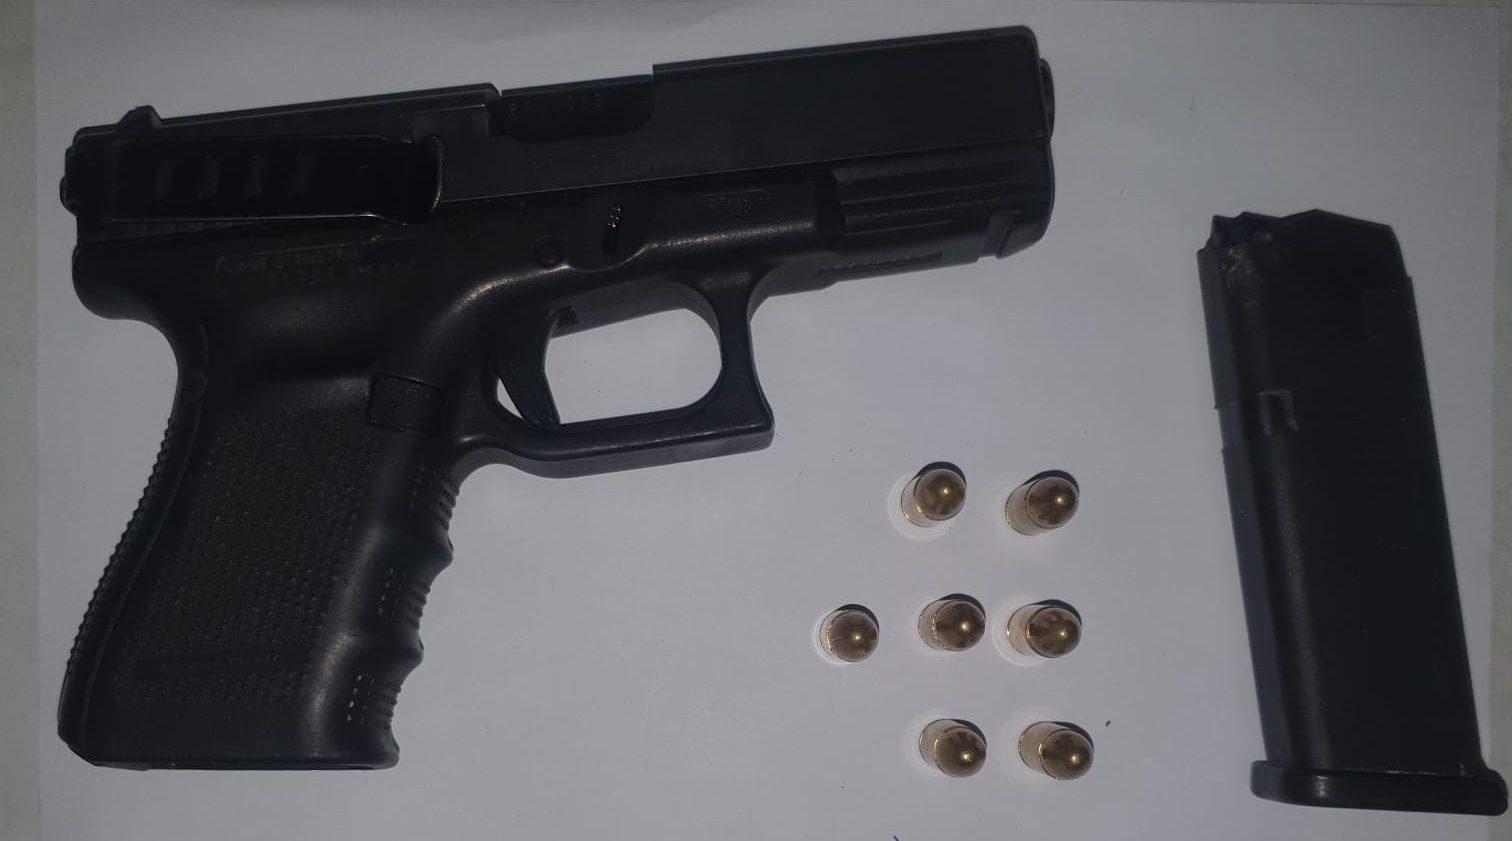 The 9mm pistol and ammunition that were found